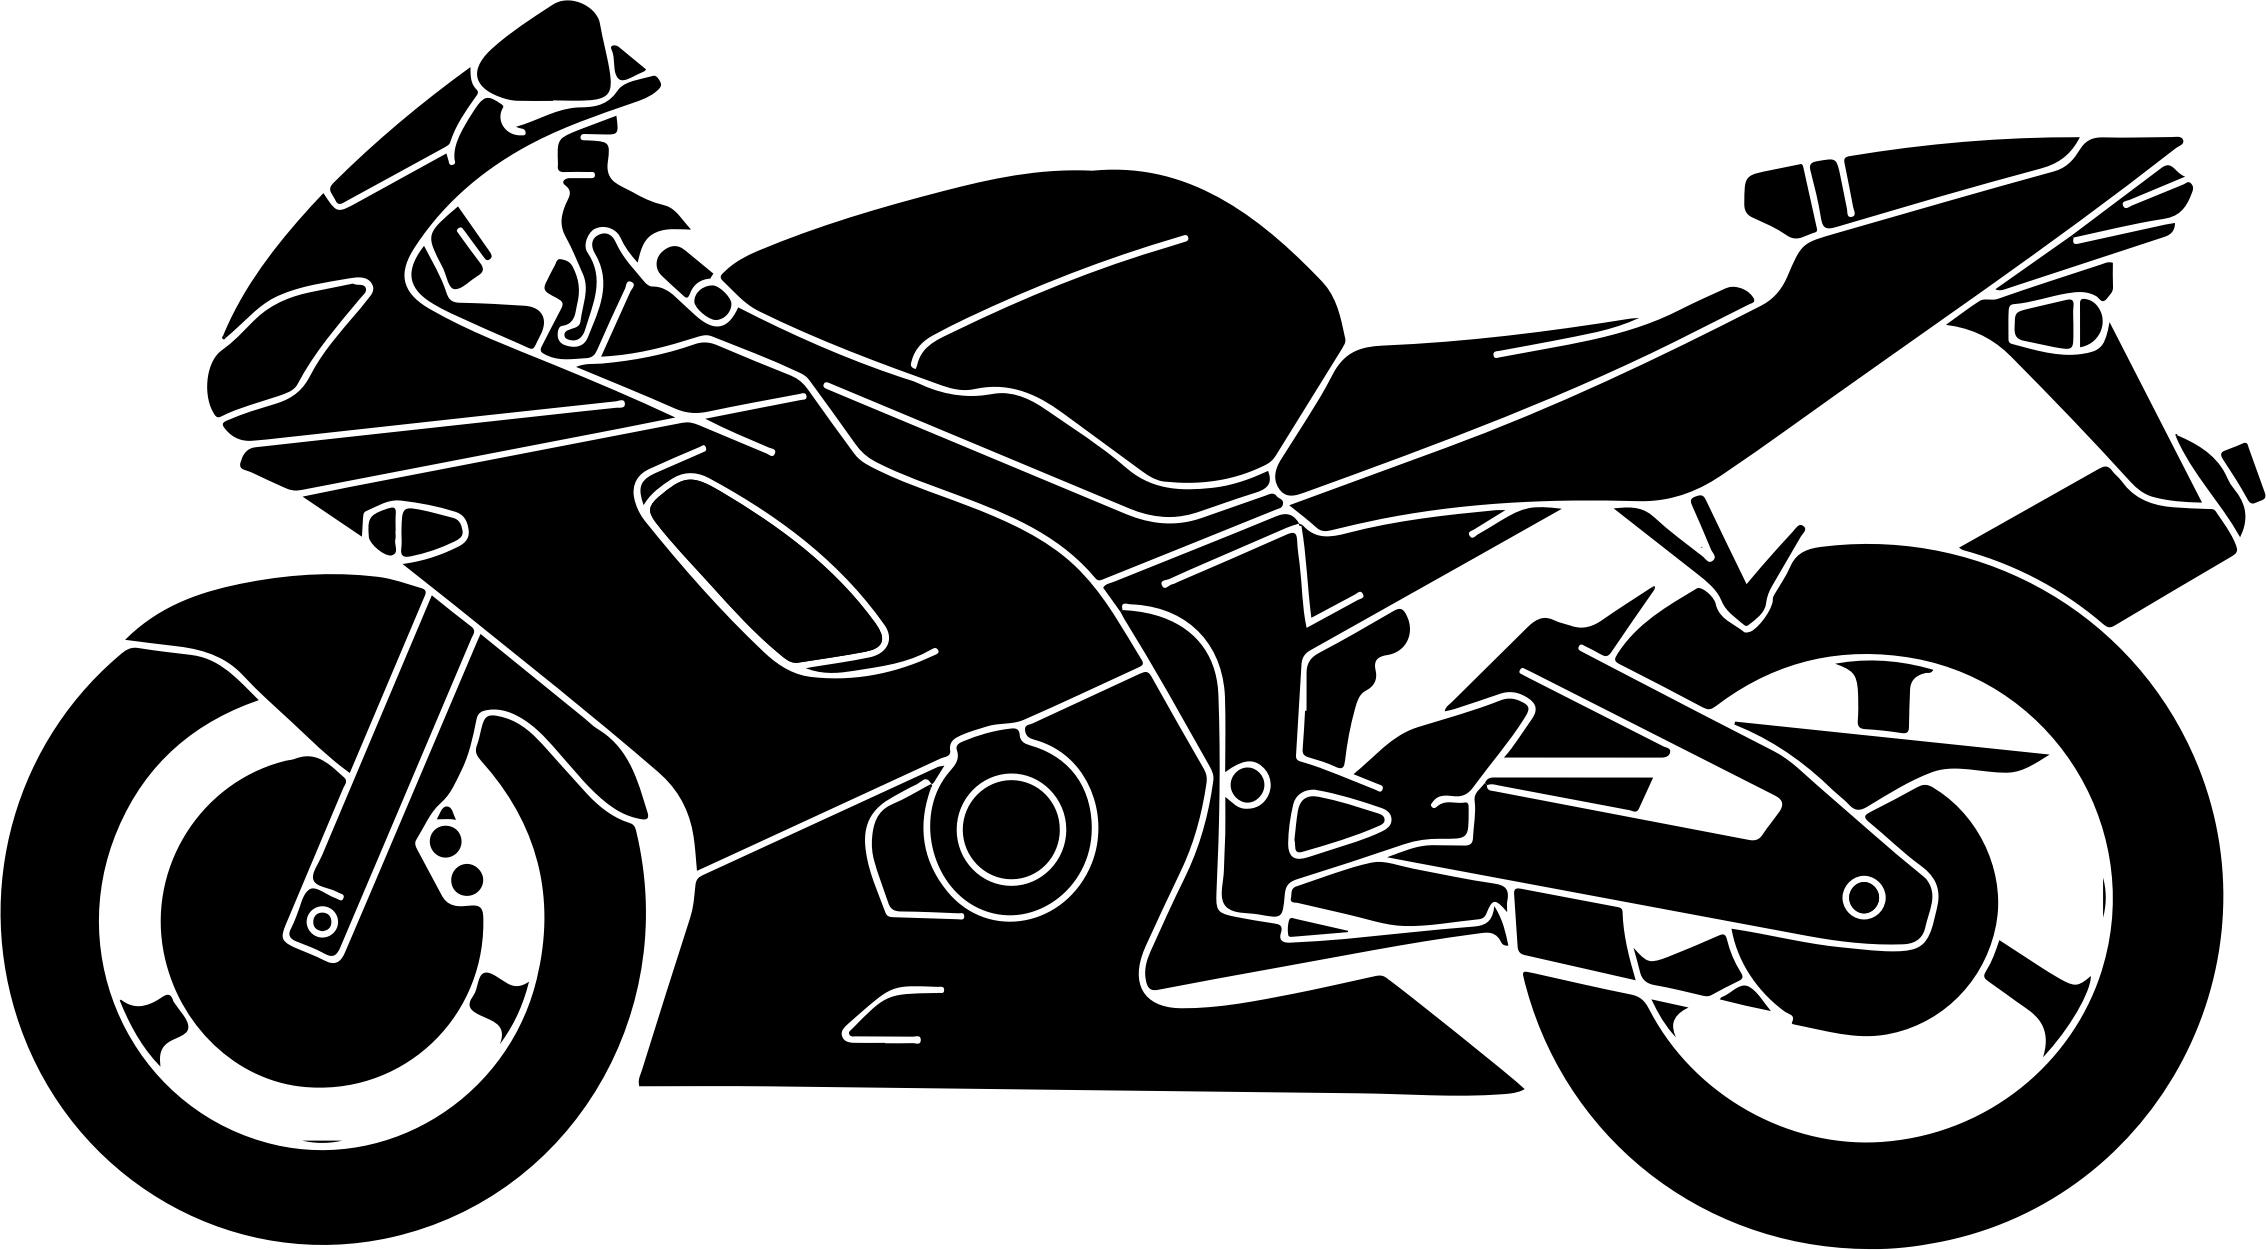 Motorcycle Silhouette Vector png